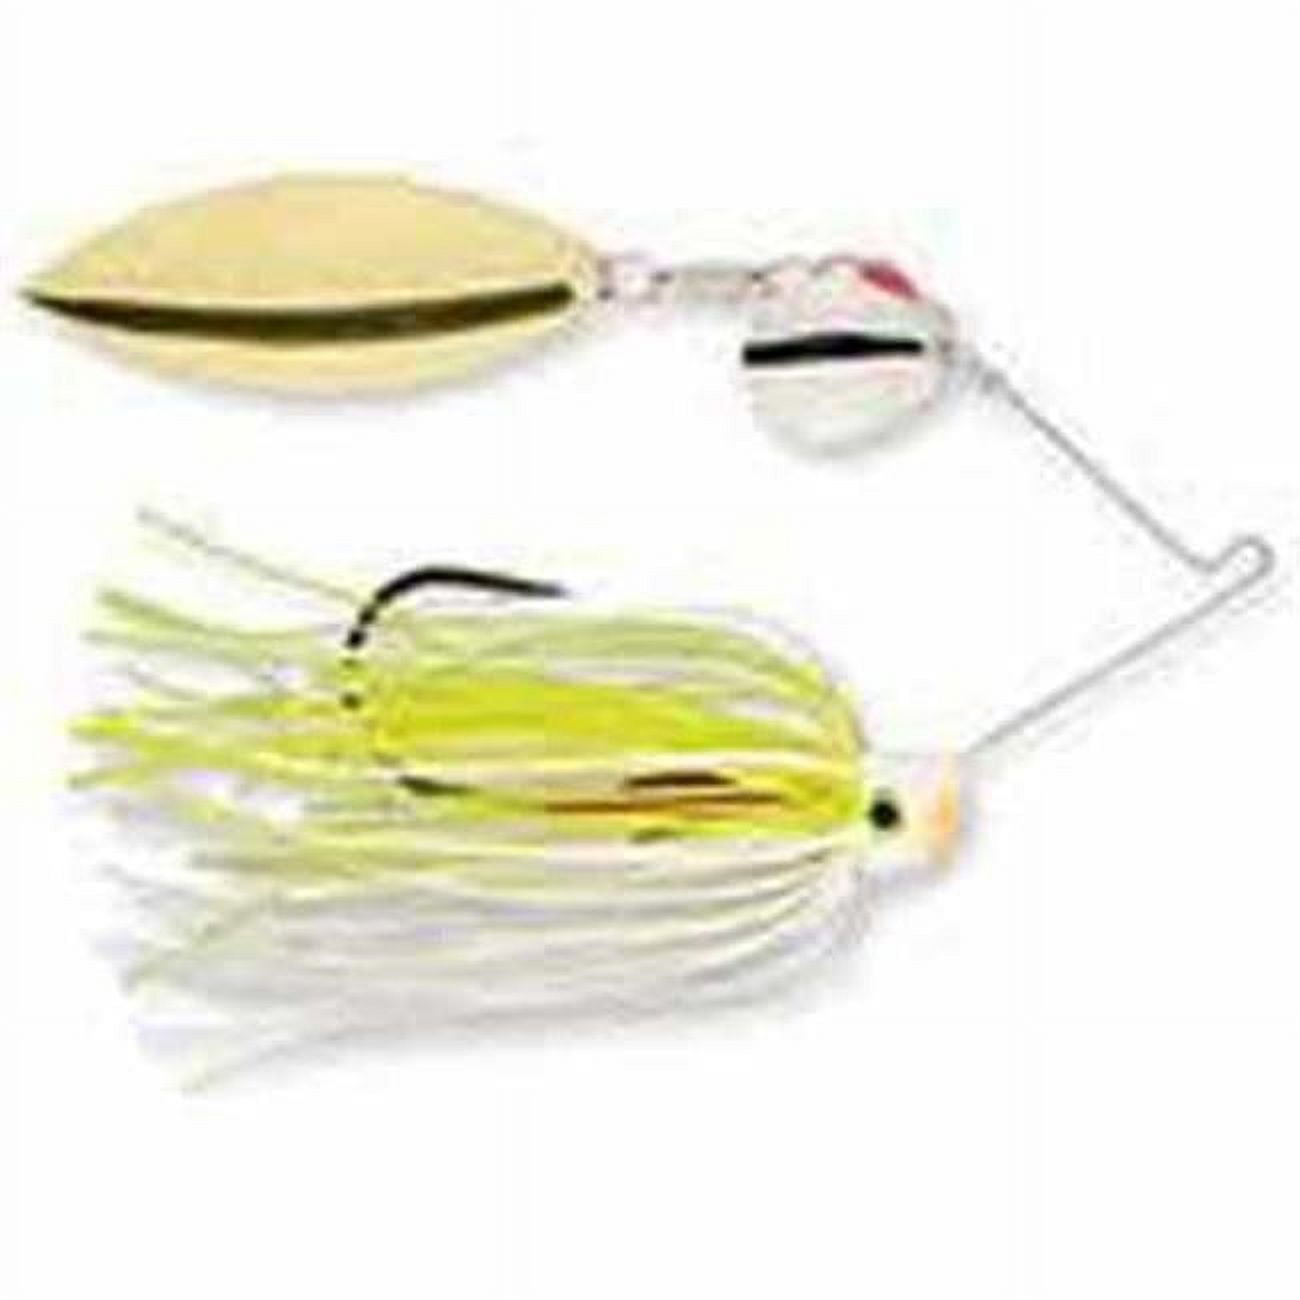 Wordens 208R-FRT Rooster Tail in-Line Spinner, 2 1/4, 1/8 oz